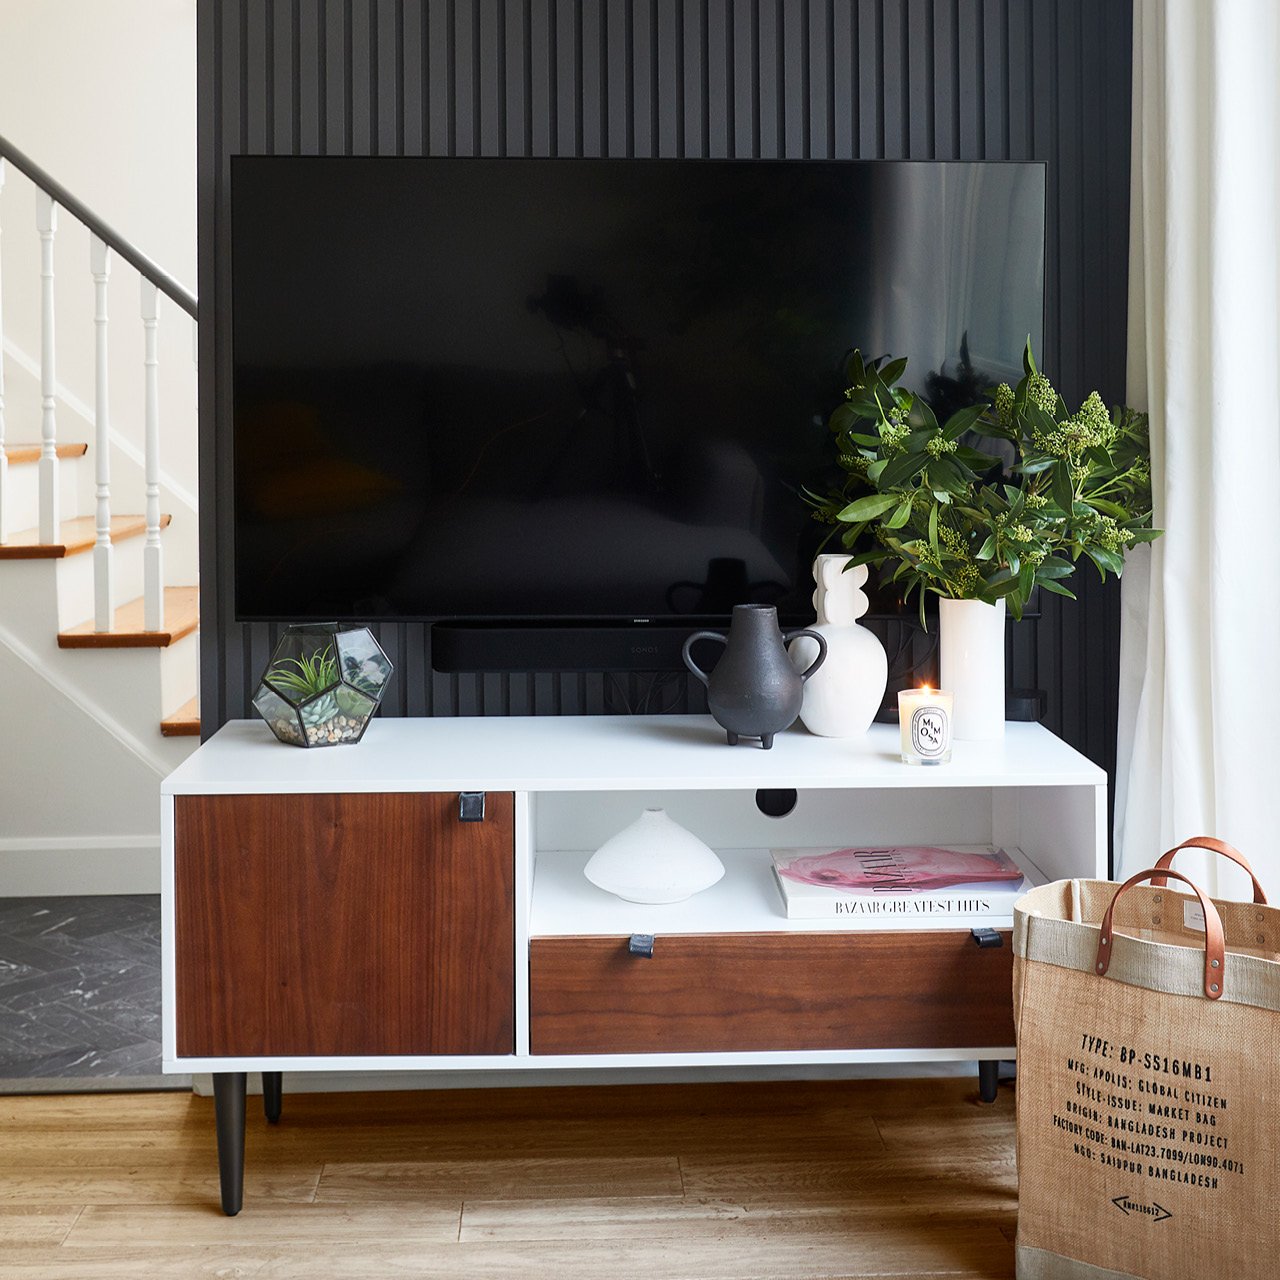 A black slat wall with a TV on a table in front of it.